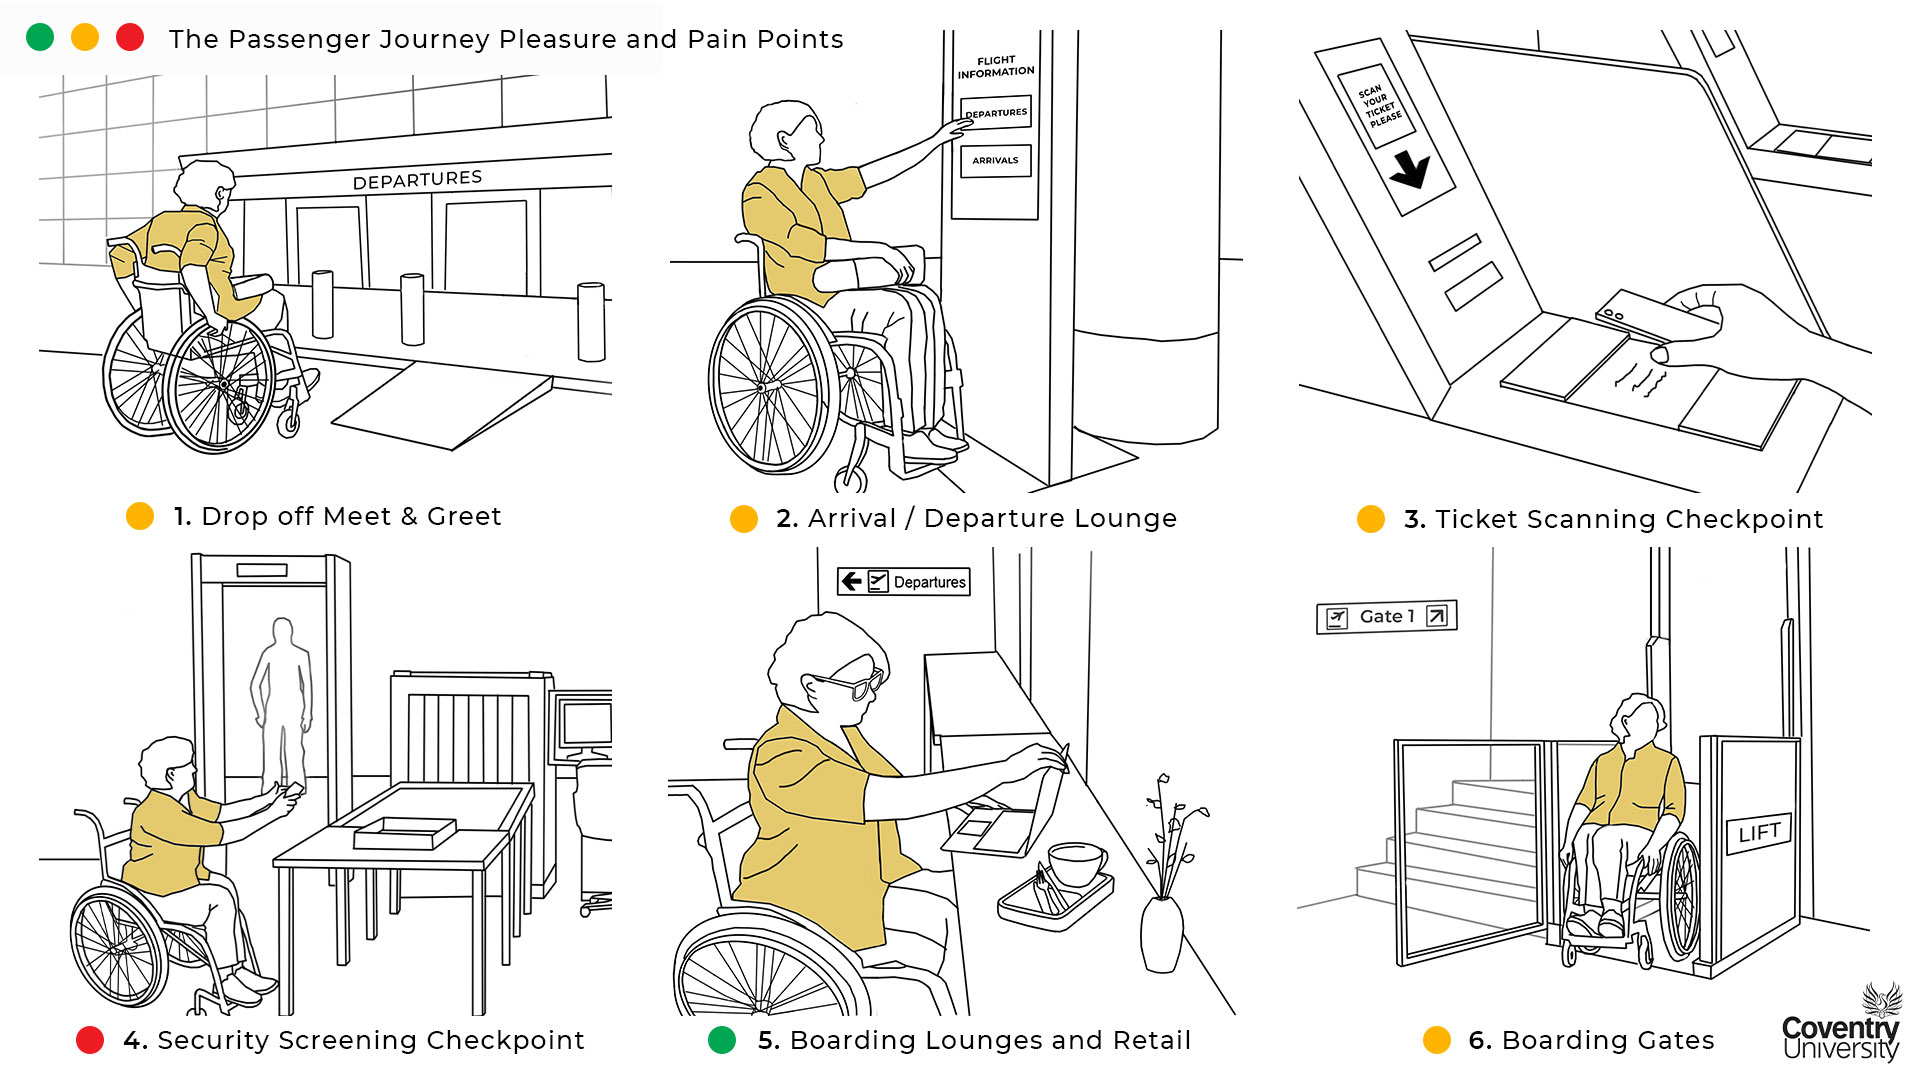 Infographic showing the passenger journey pain and pleasure points for those with a disability